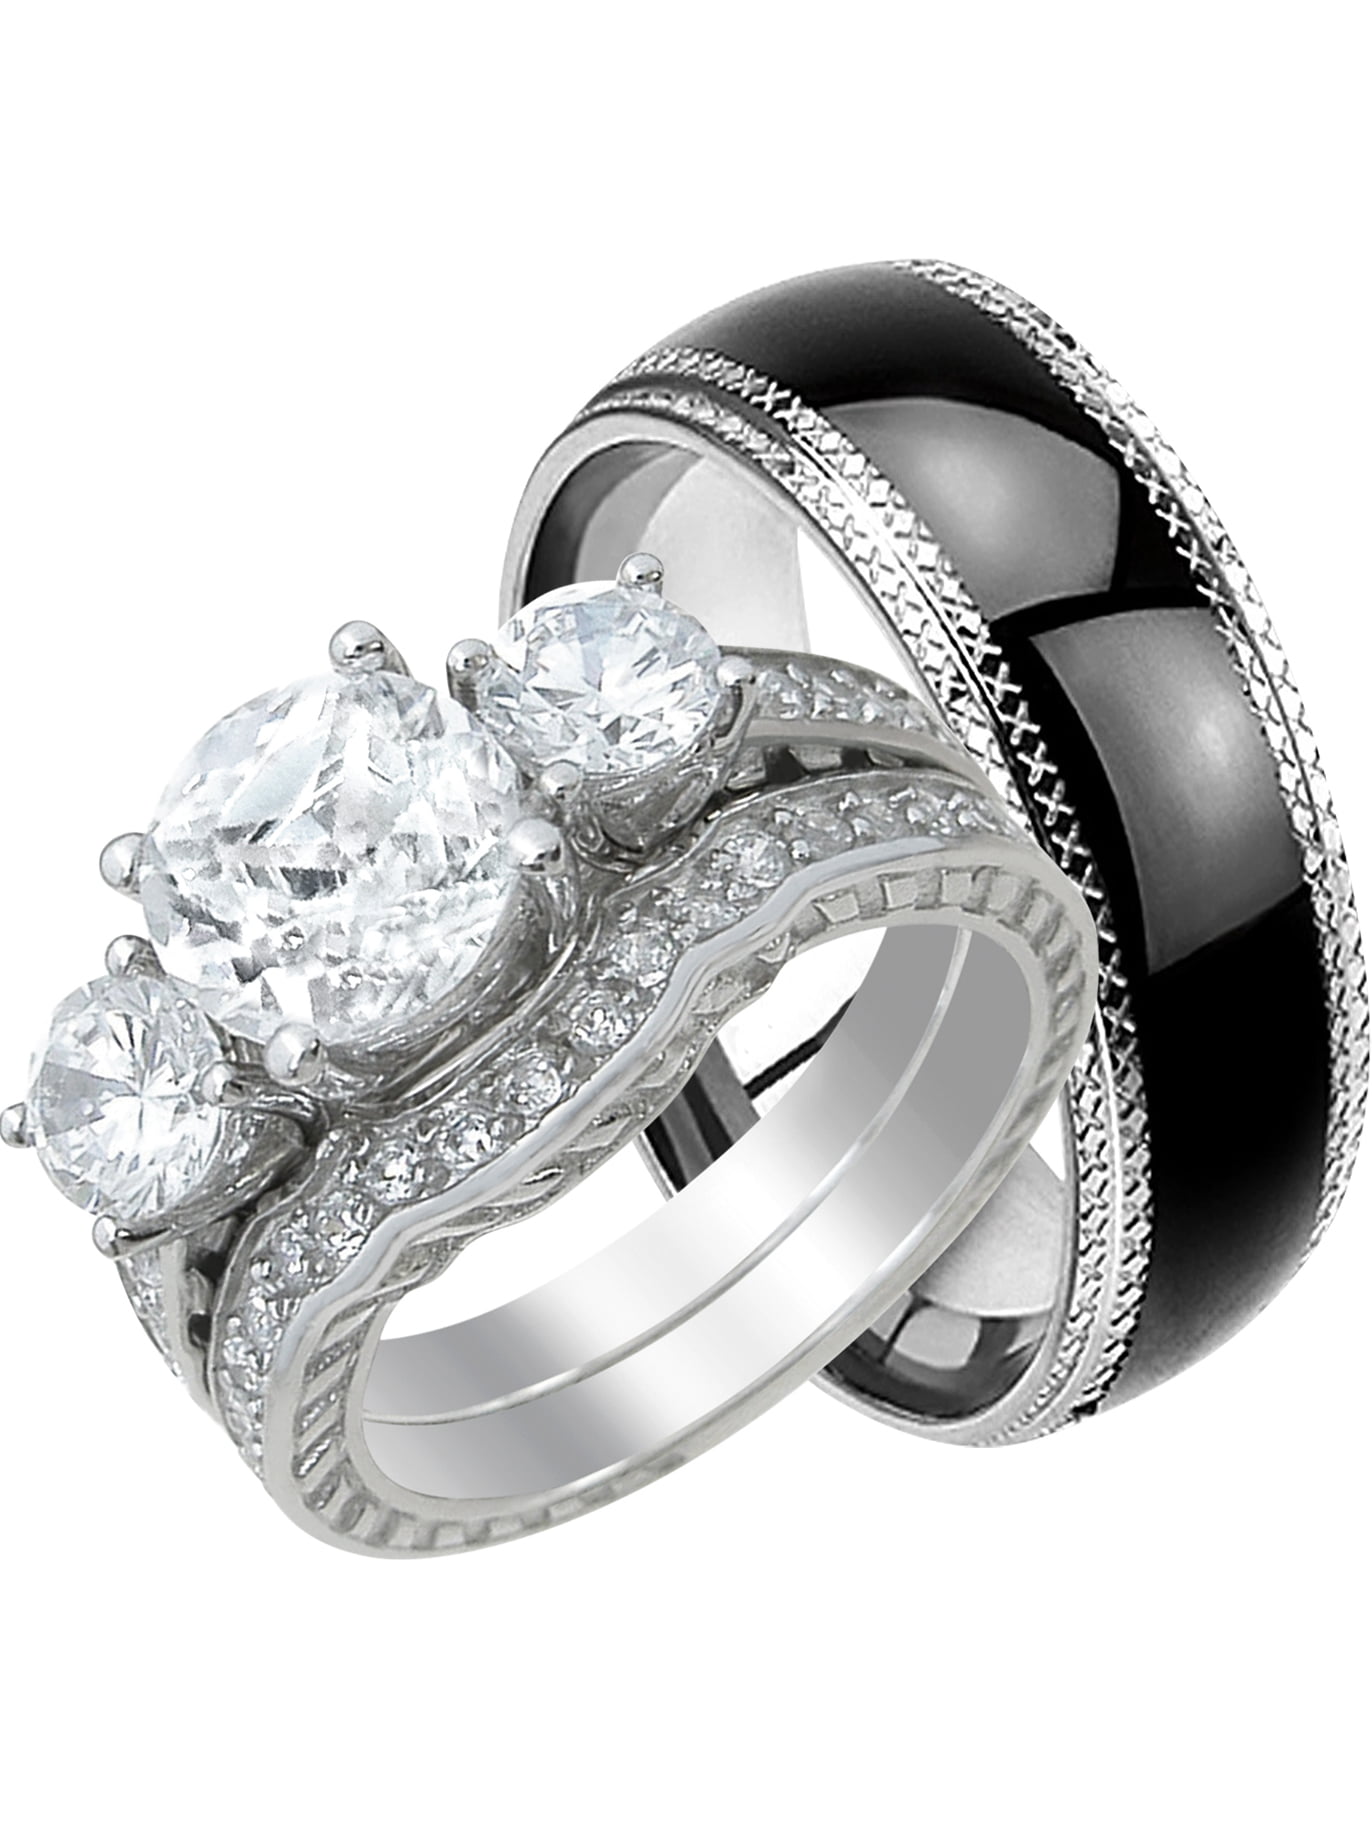 LaRaso & Co His and Hers Wedding Ring Set Matching Wedding Bands for